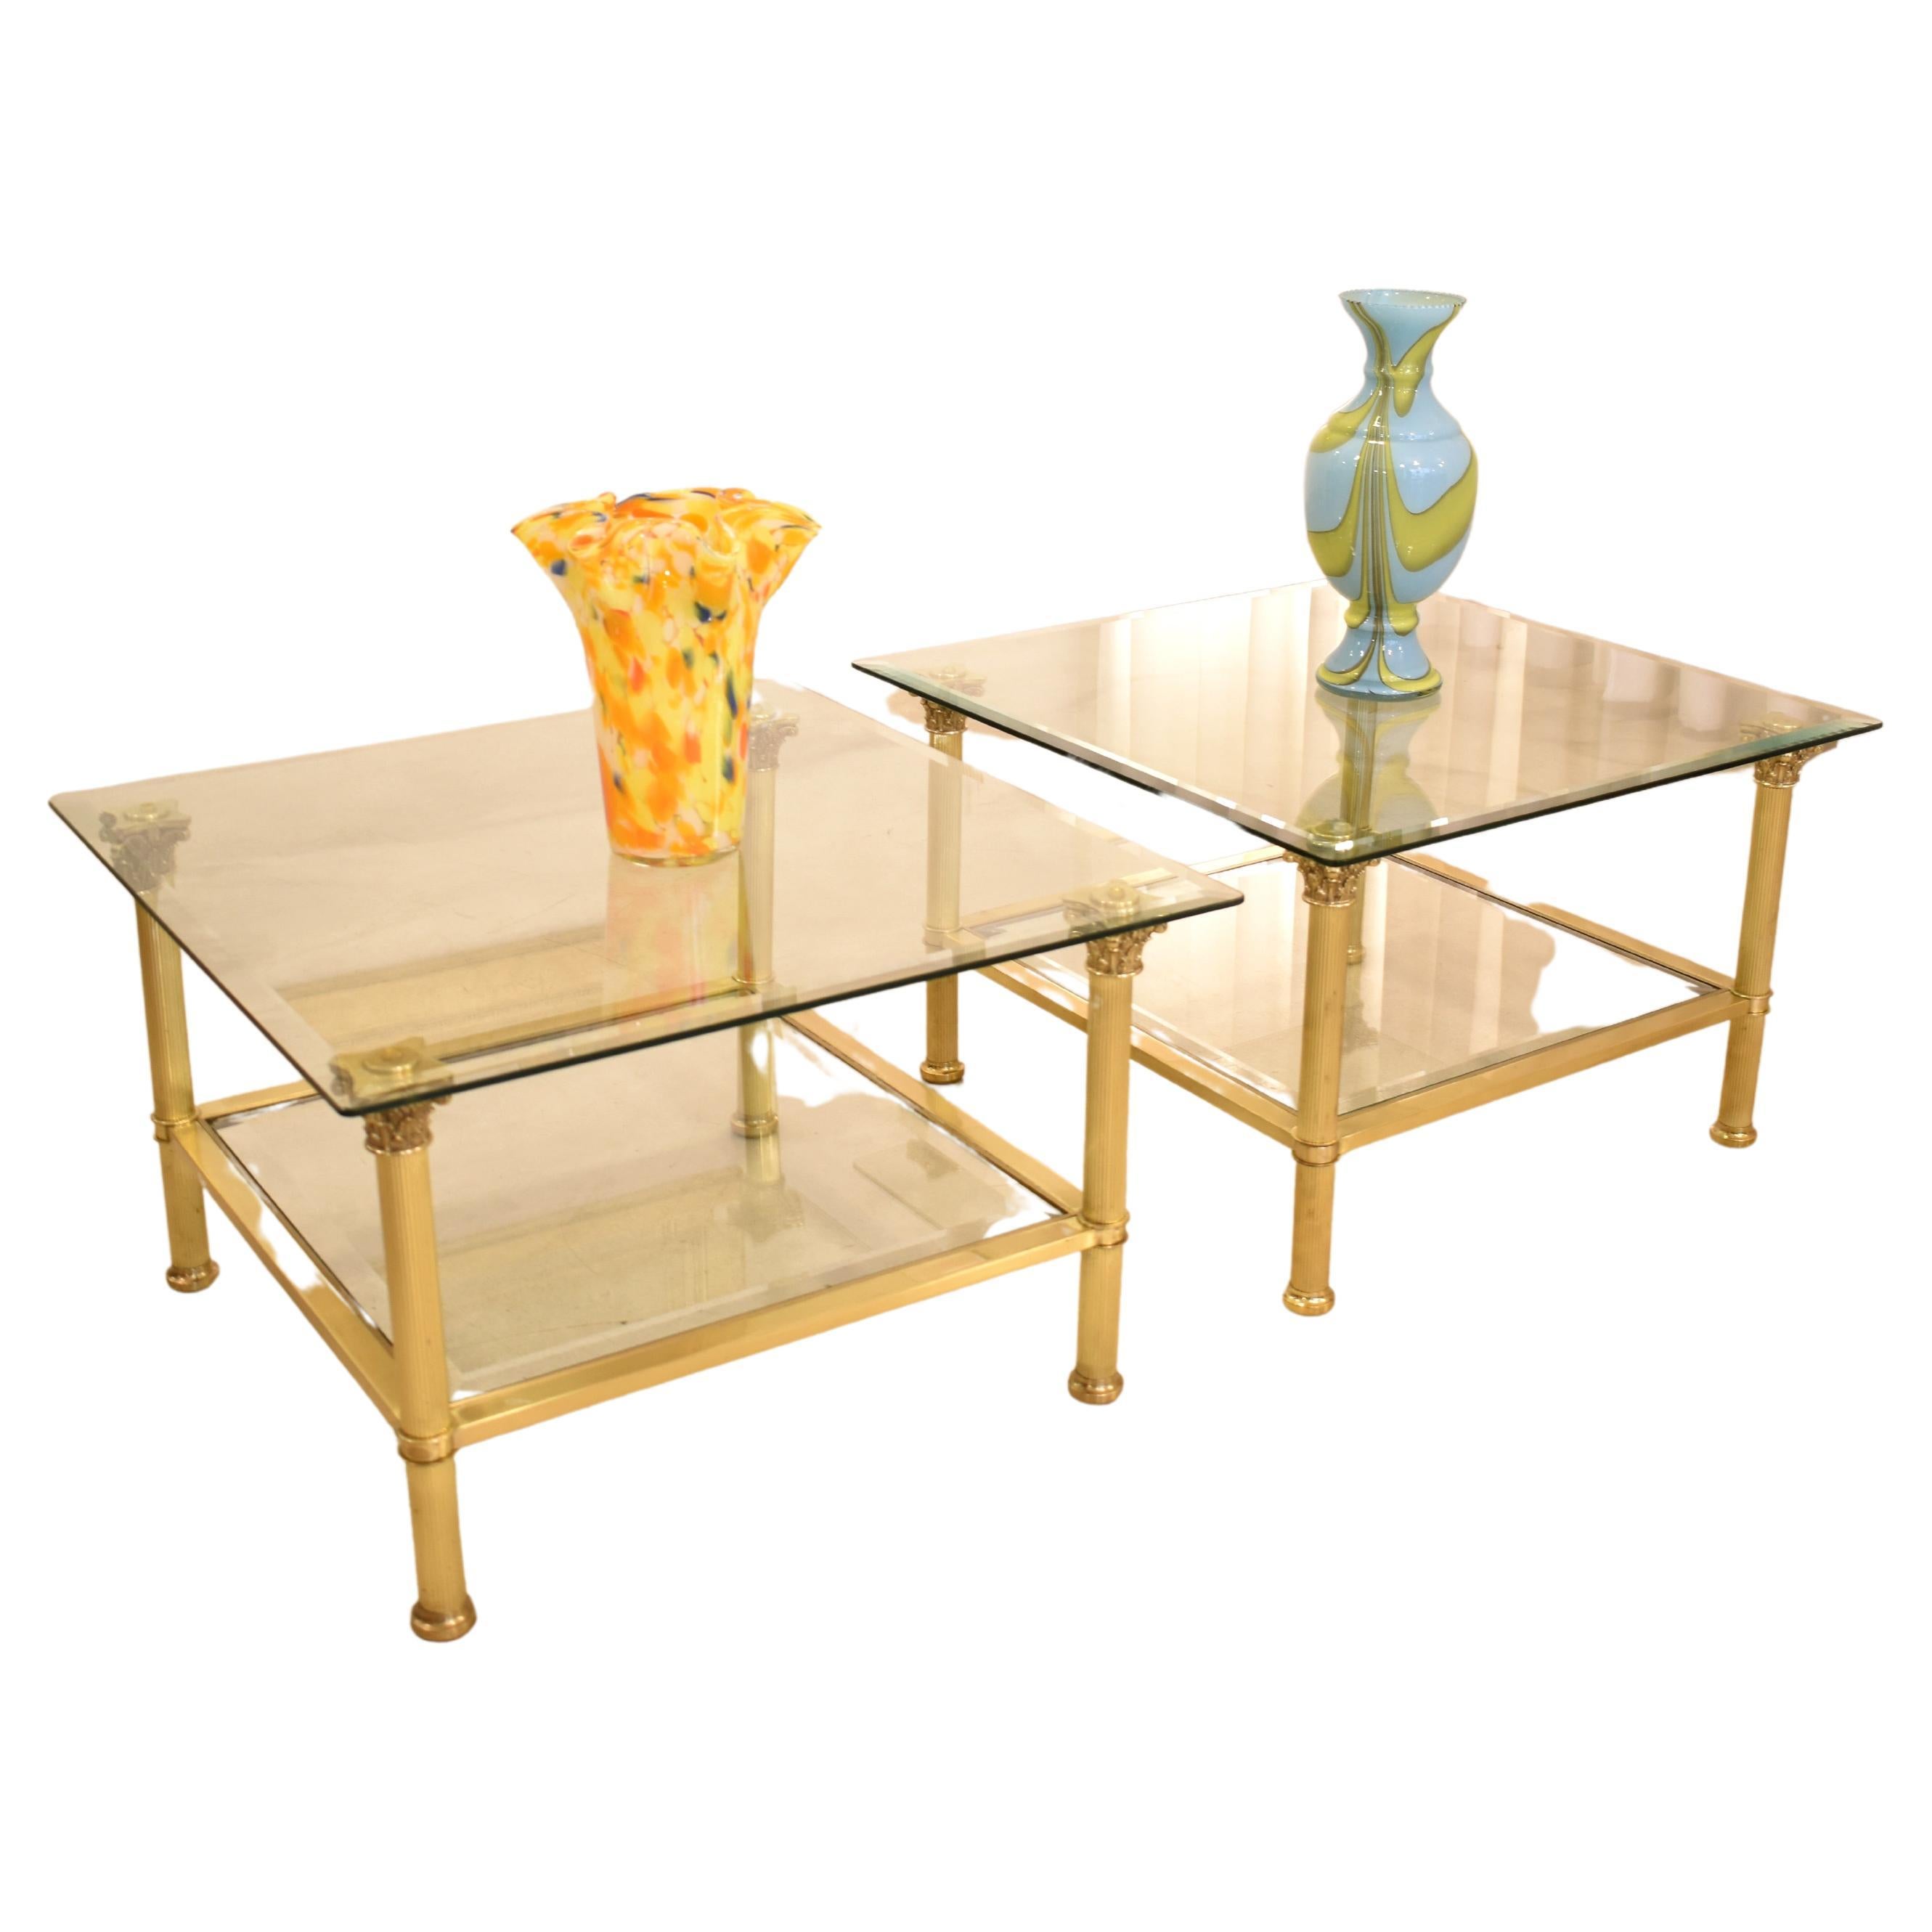 A pair of coffee tables designed in the French Hollywood Regency style, attributed to Maison Jansen from the 1980s. Each table features two-tiered glass shelves, adorned with sculpted details reminiscent of classical columns. Crafted from brass,